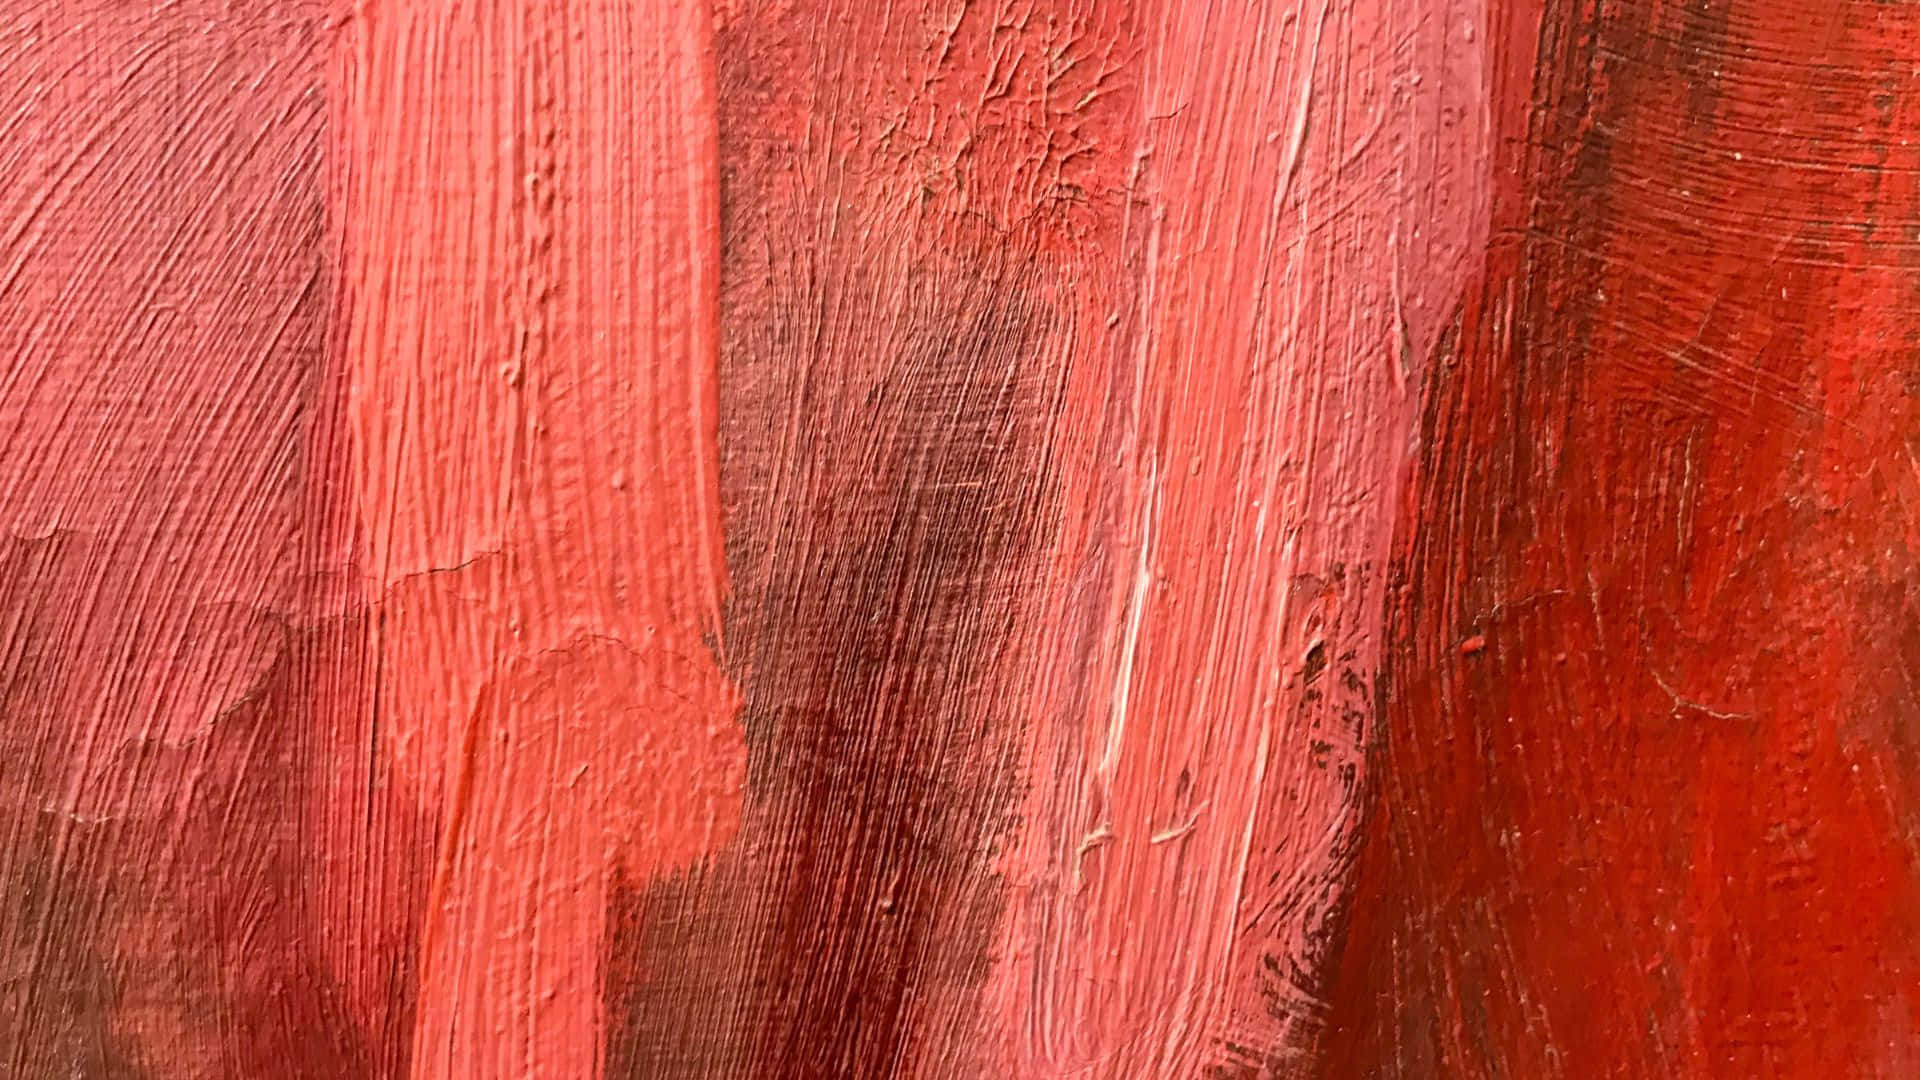 Rough Red Texture Background